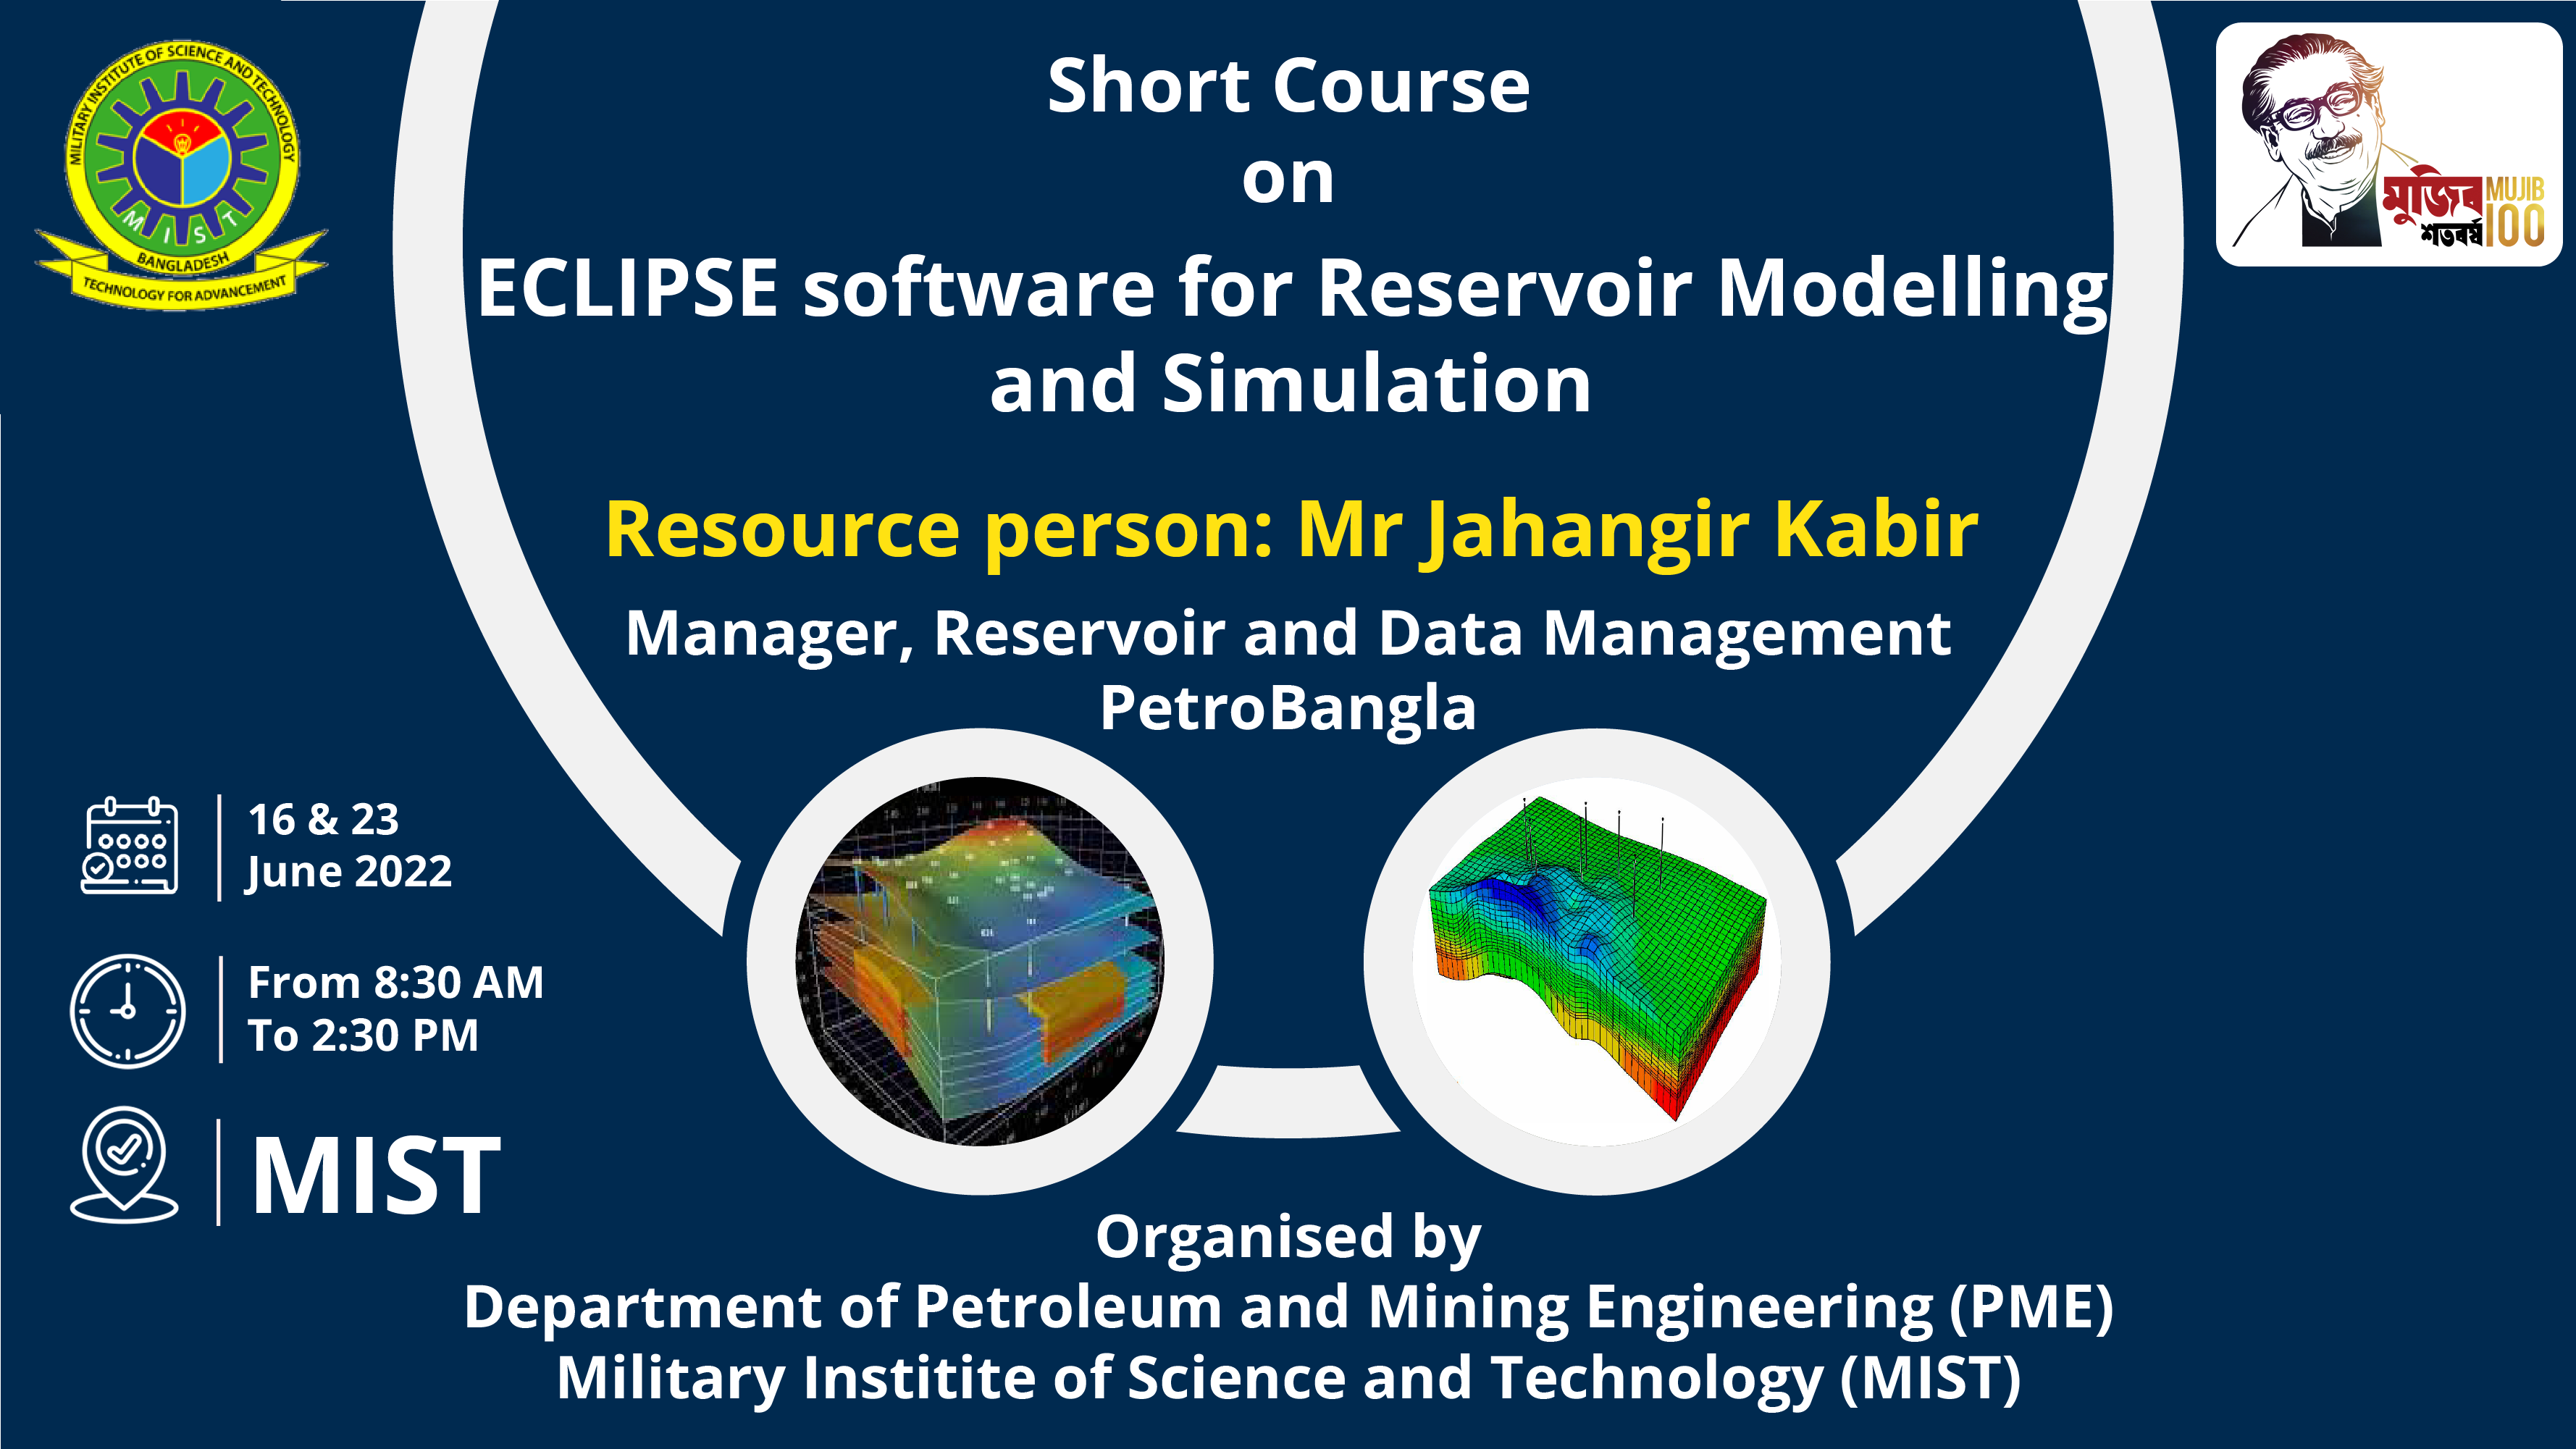 Short Course on ECLIPSE software for Reservoir Modeling and Simulation